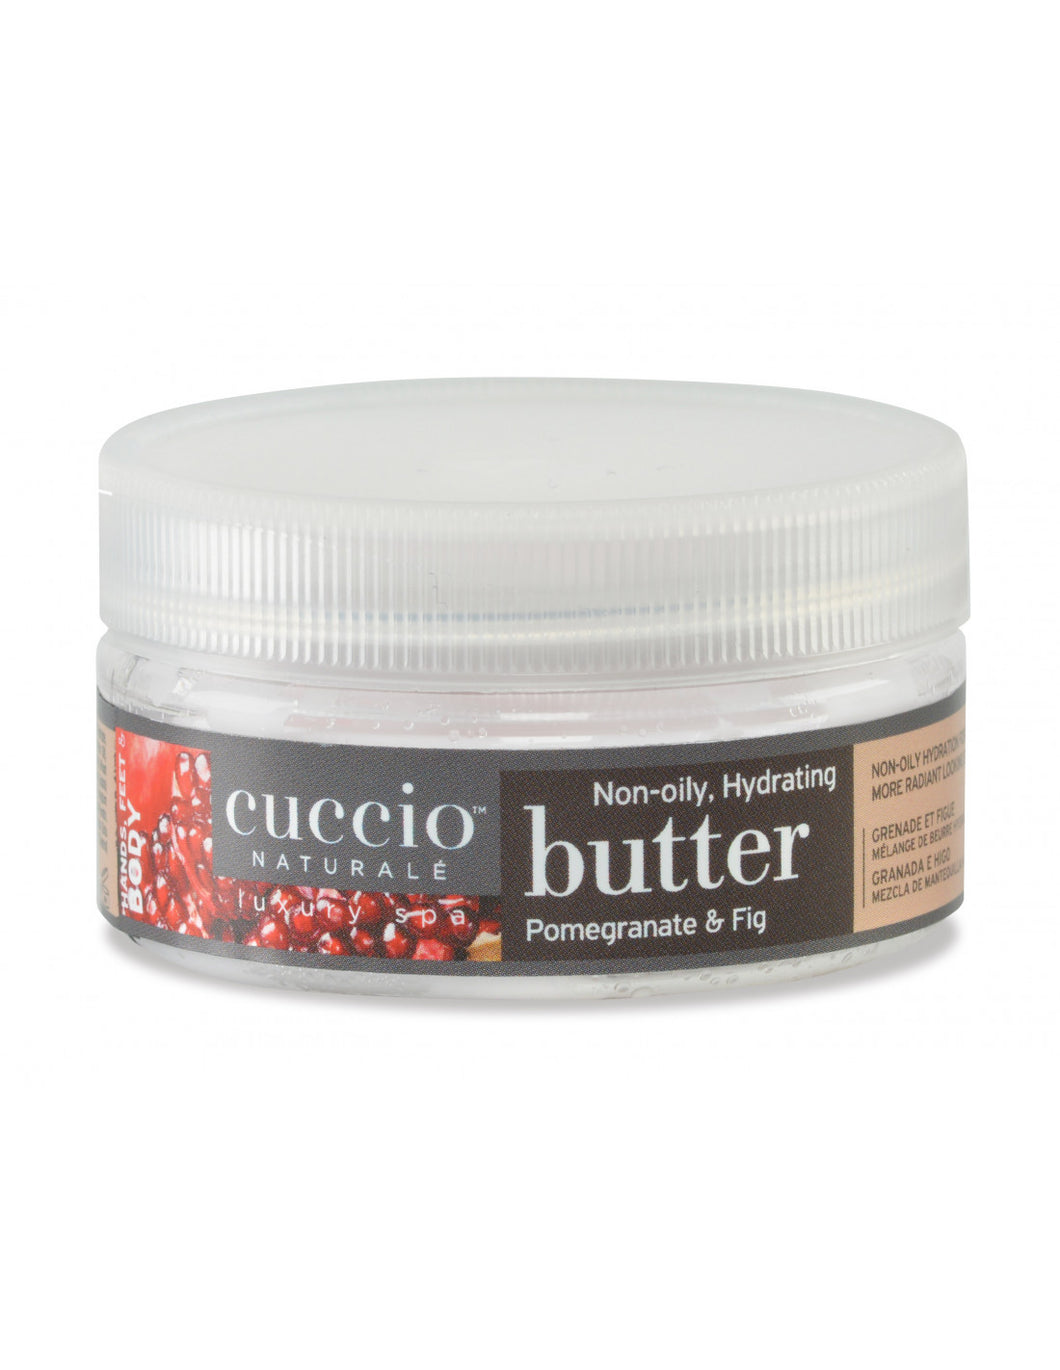 CUCCIO NATURALÉ HYDRATING BUTTER - POMEGRANATE & FIG ΒΑΒΥ ΒUΤΤΕR 42gr